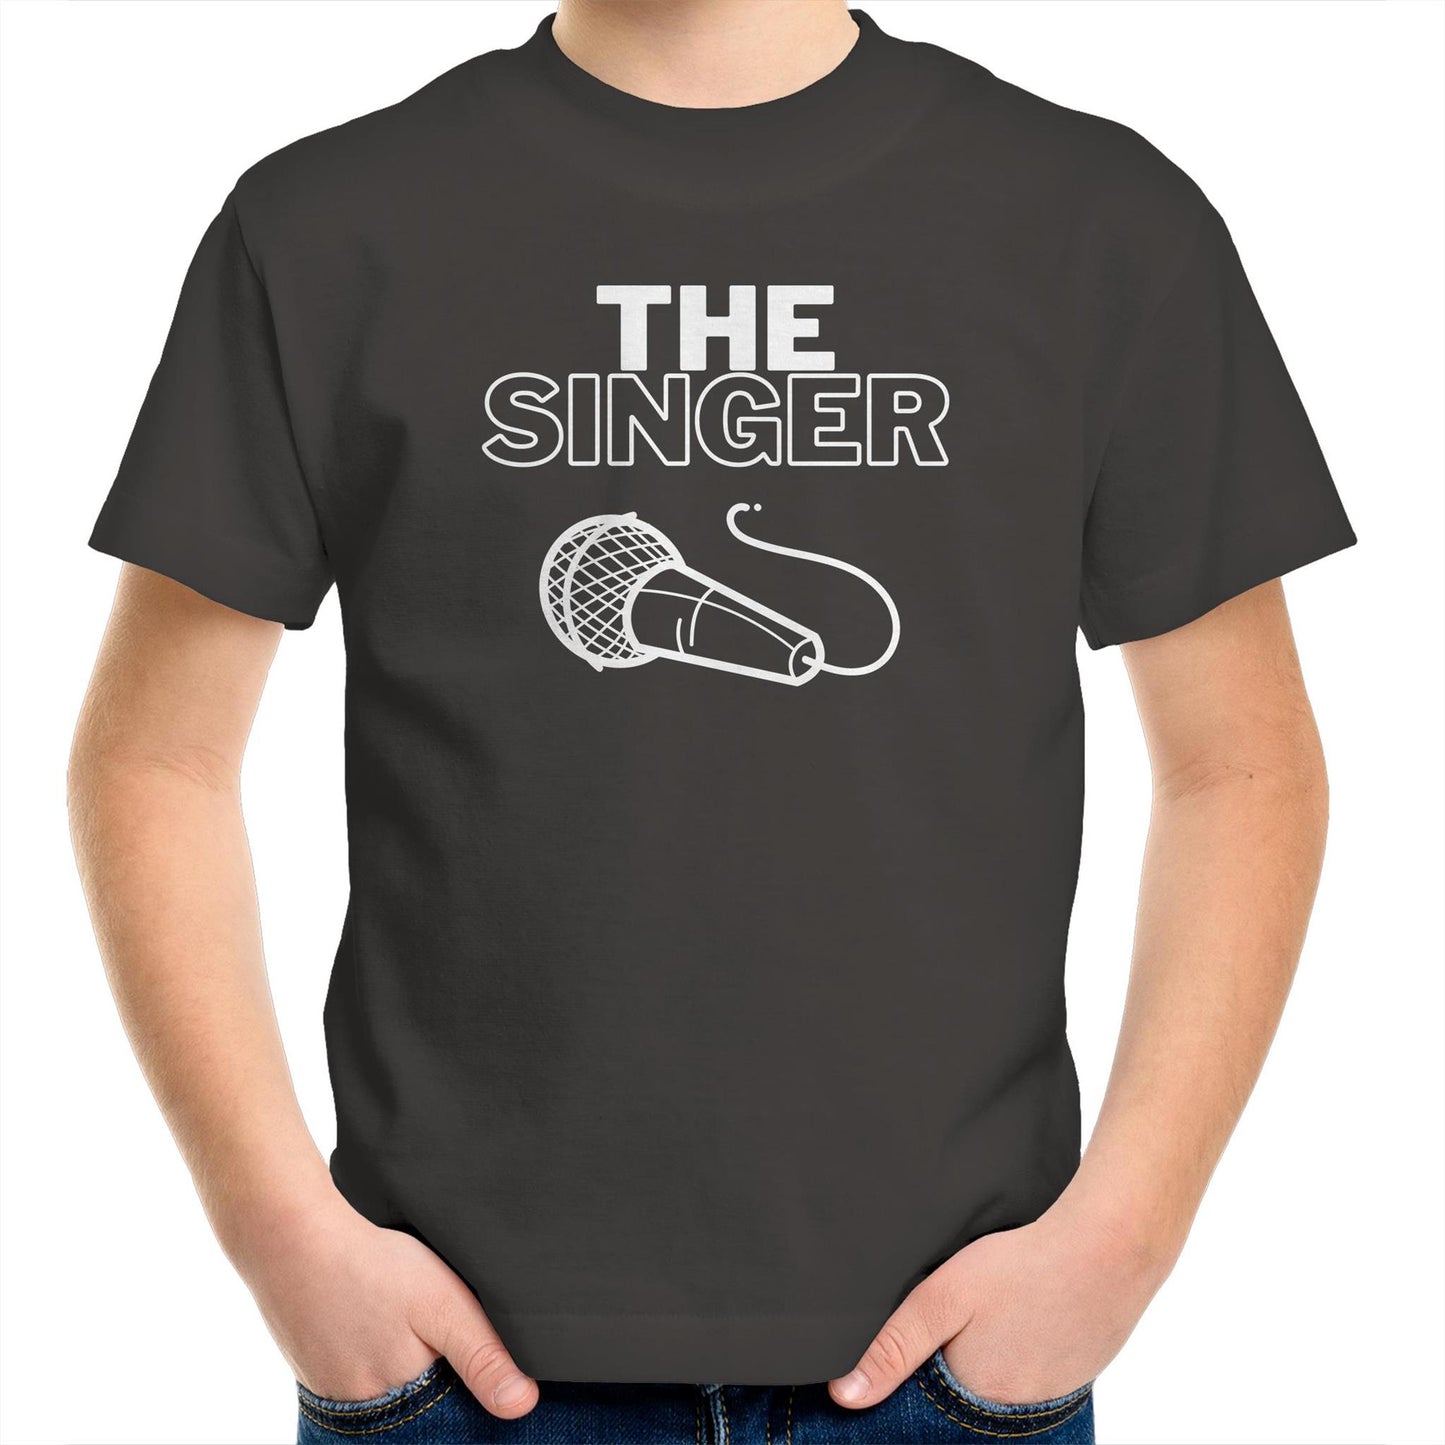 The Singer - Kids Youth T-Shirt Charcoal Kids Youth T-shirt Music